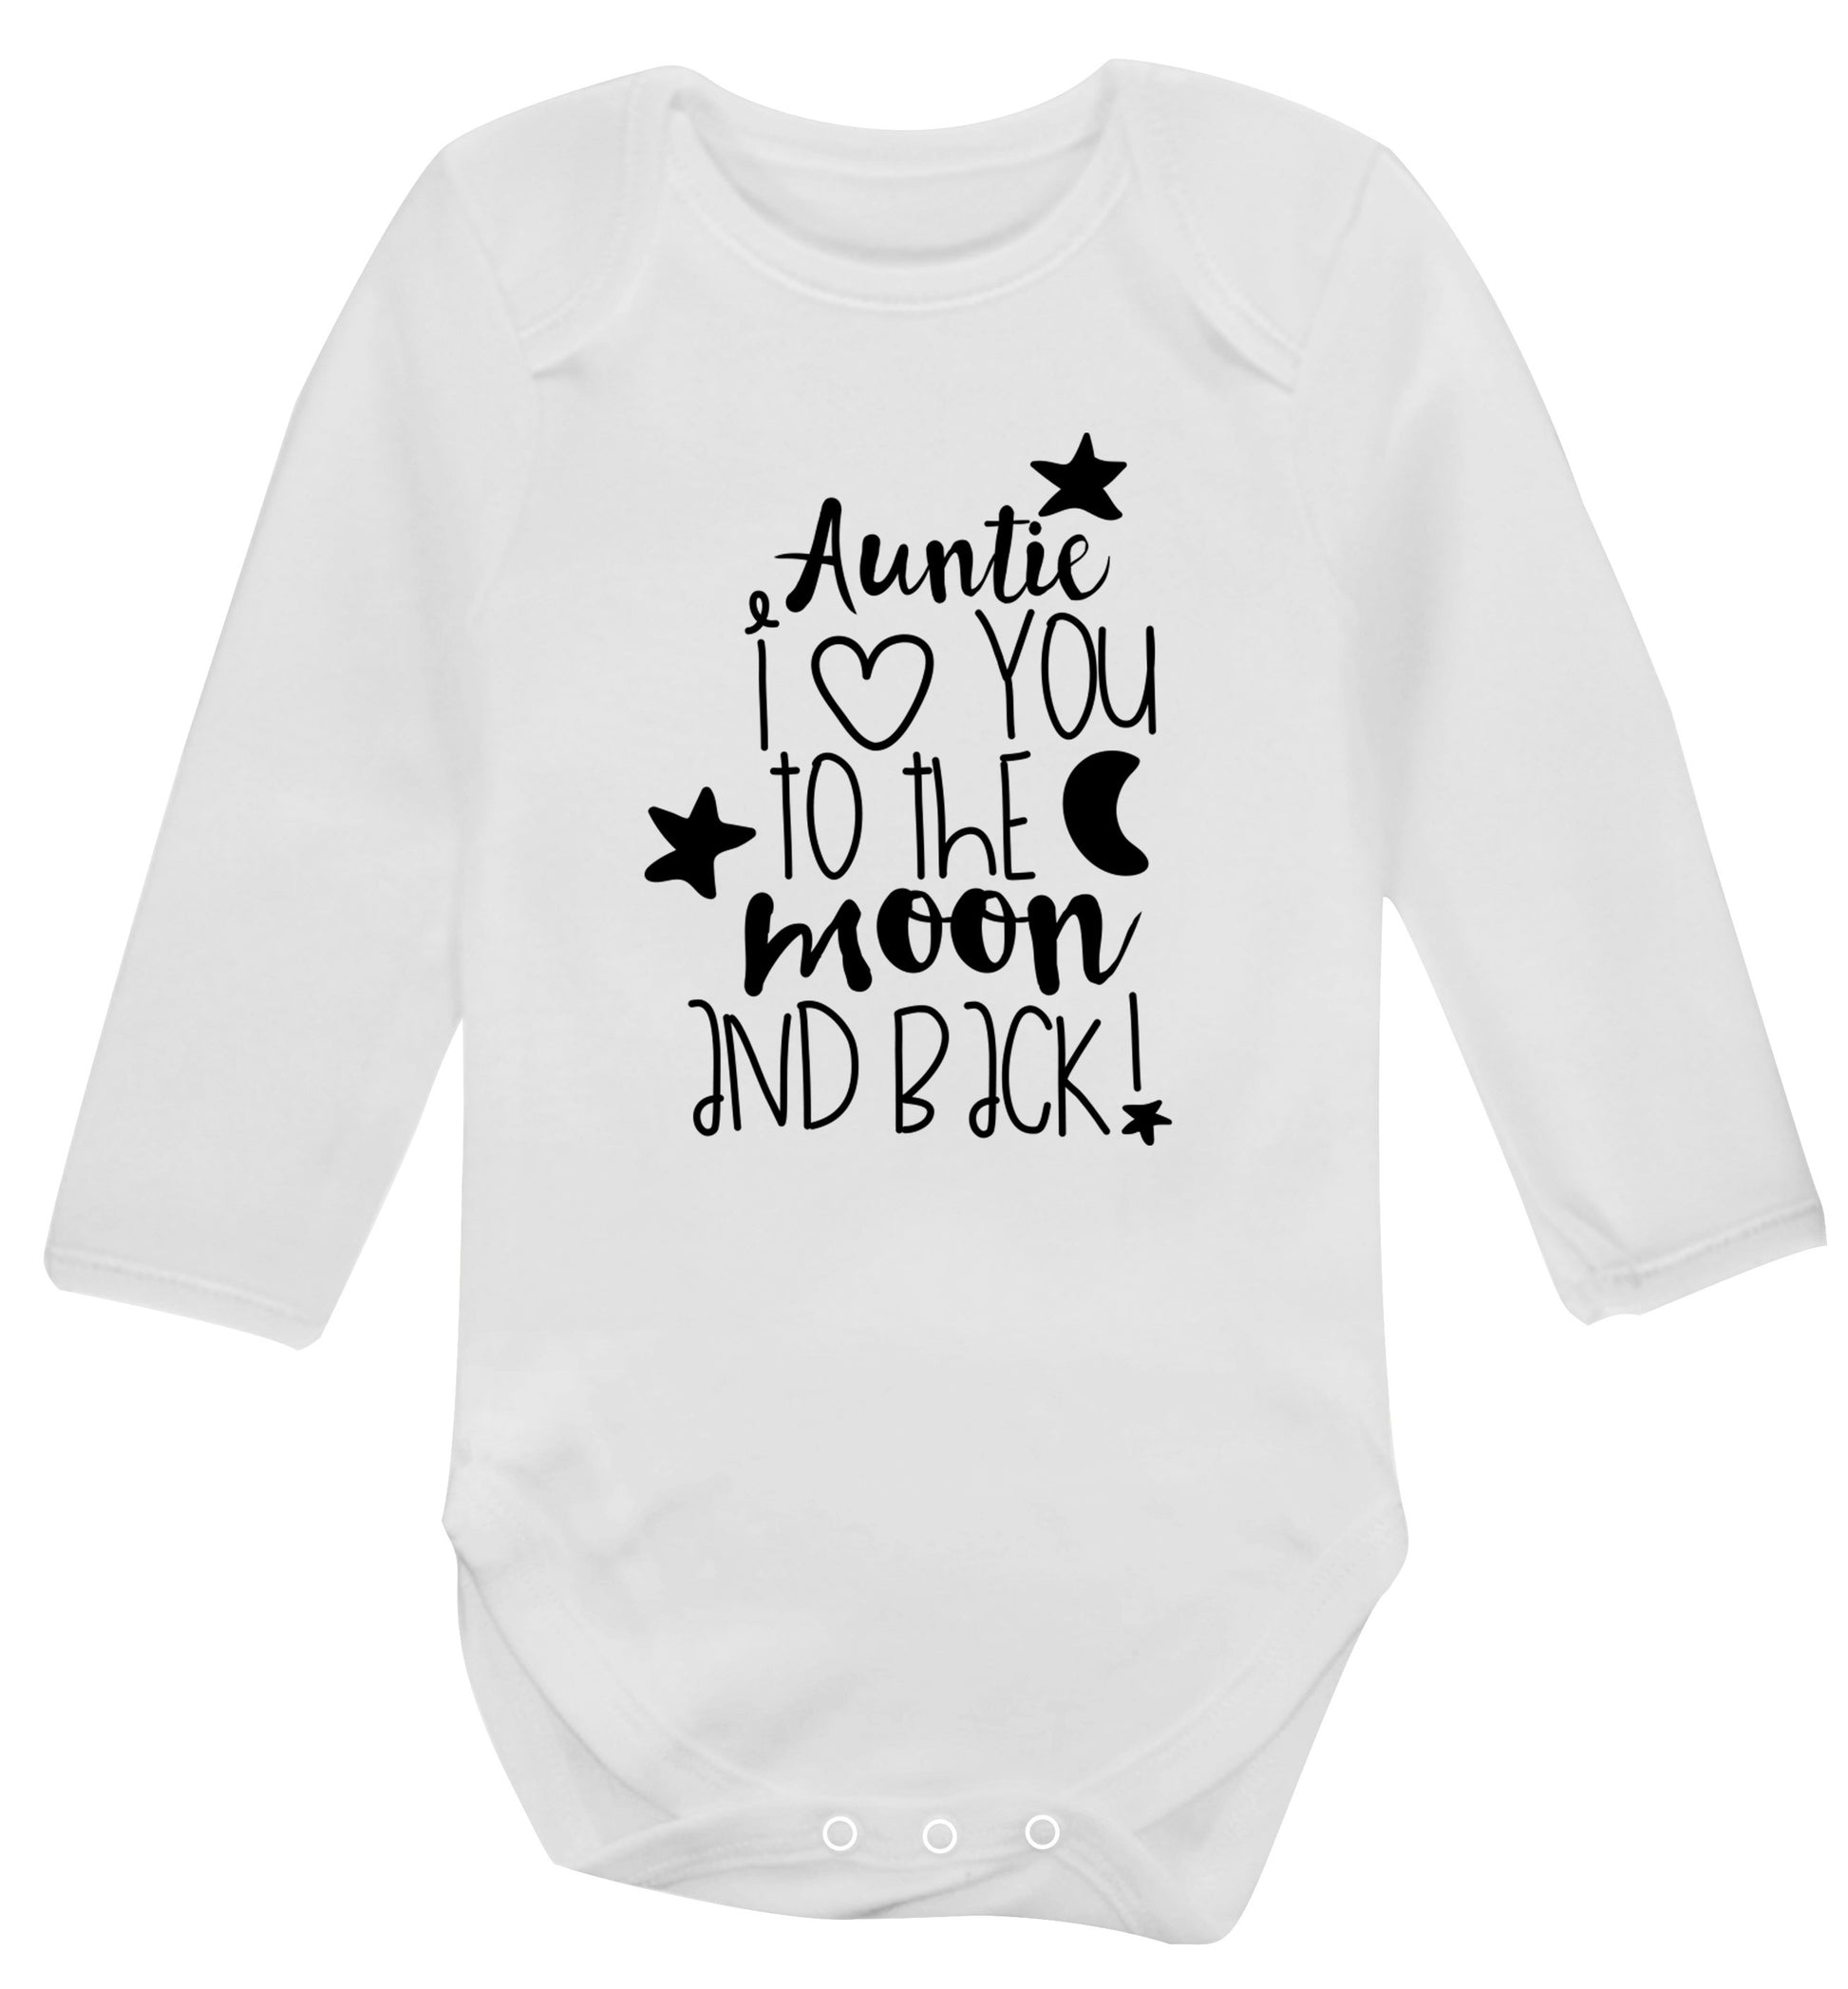 Auntie I love you to the moon and back Baby Vest long sleeved white 6-12 months